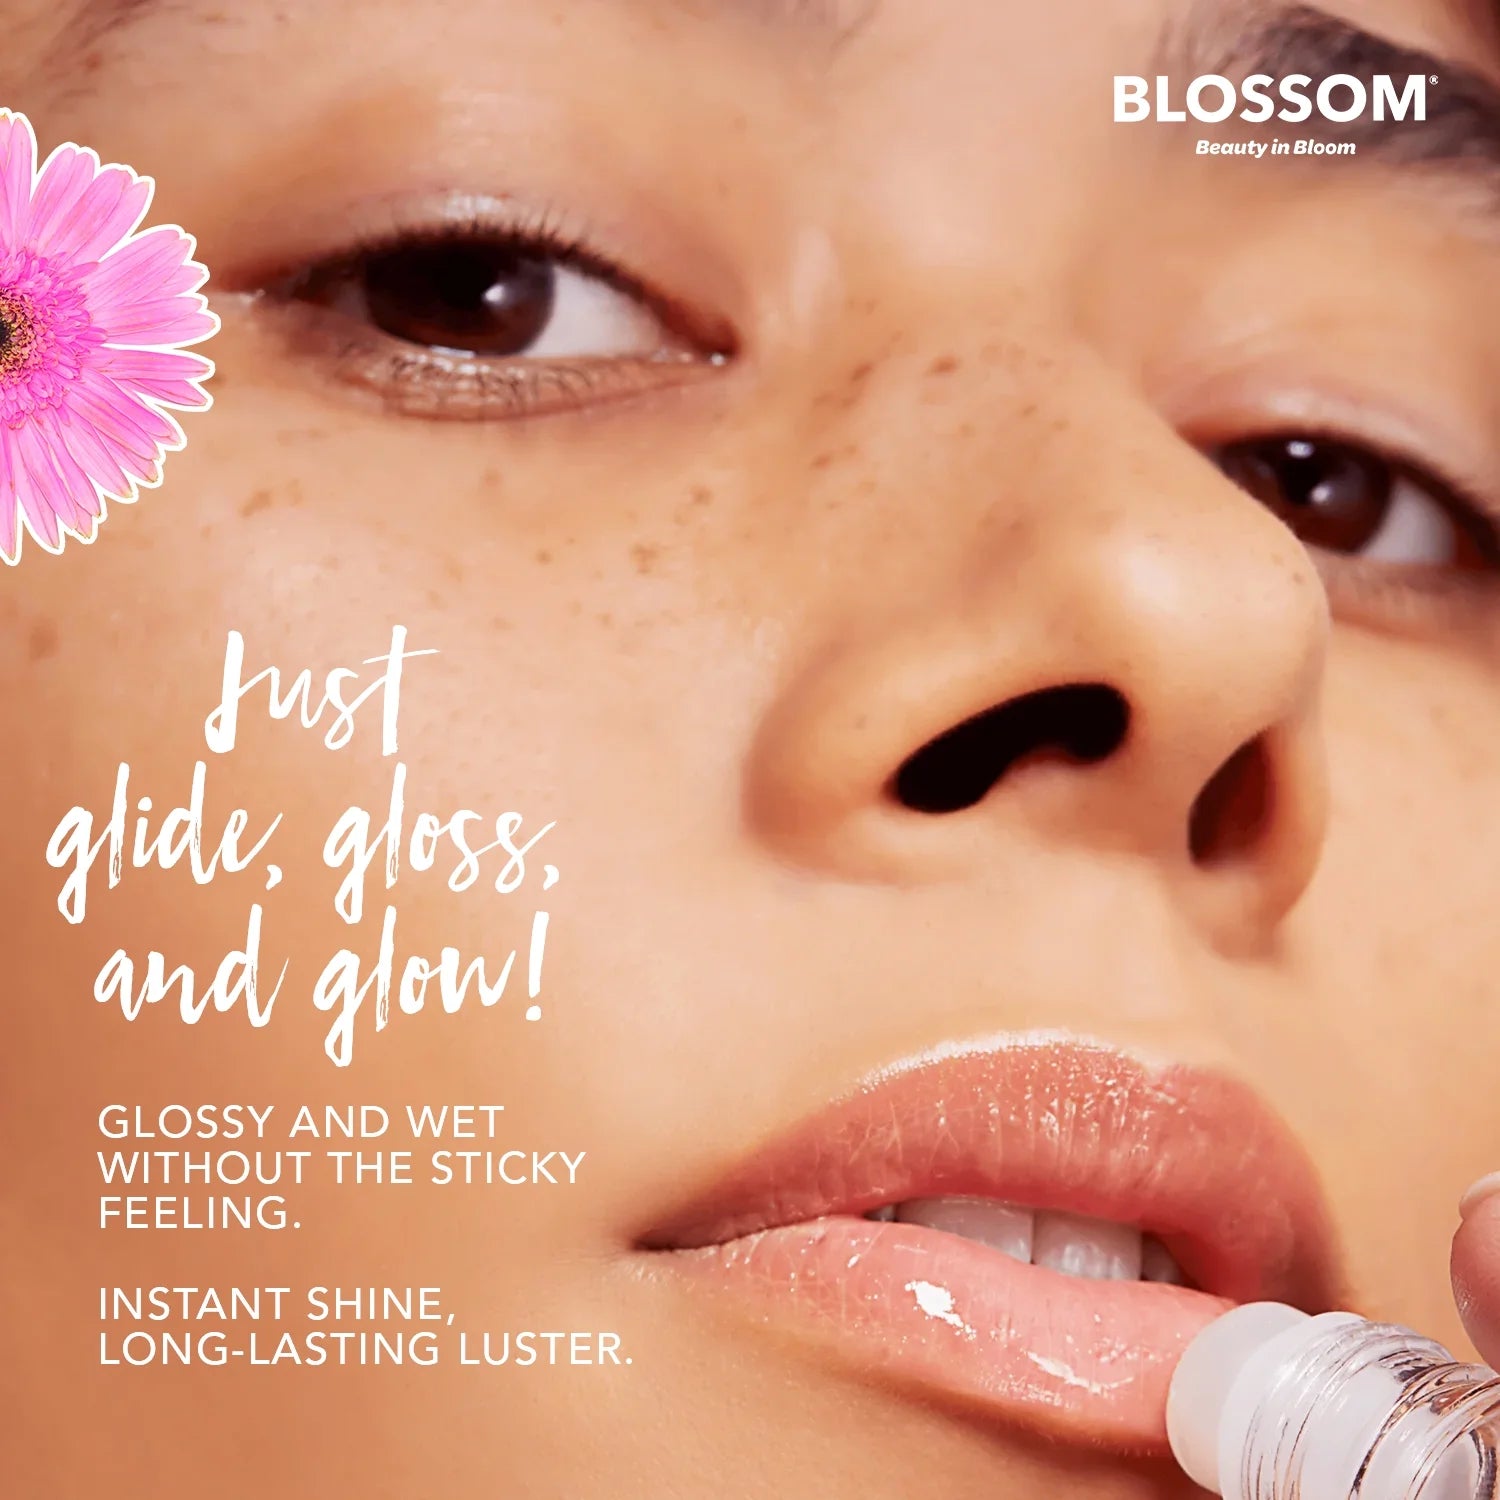 Blossom Scented Roll on Lip Gloss, Infused with Real Flowers, 0.20 fl. oz./5.9ml